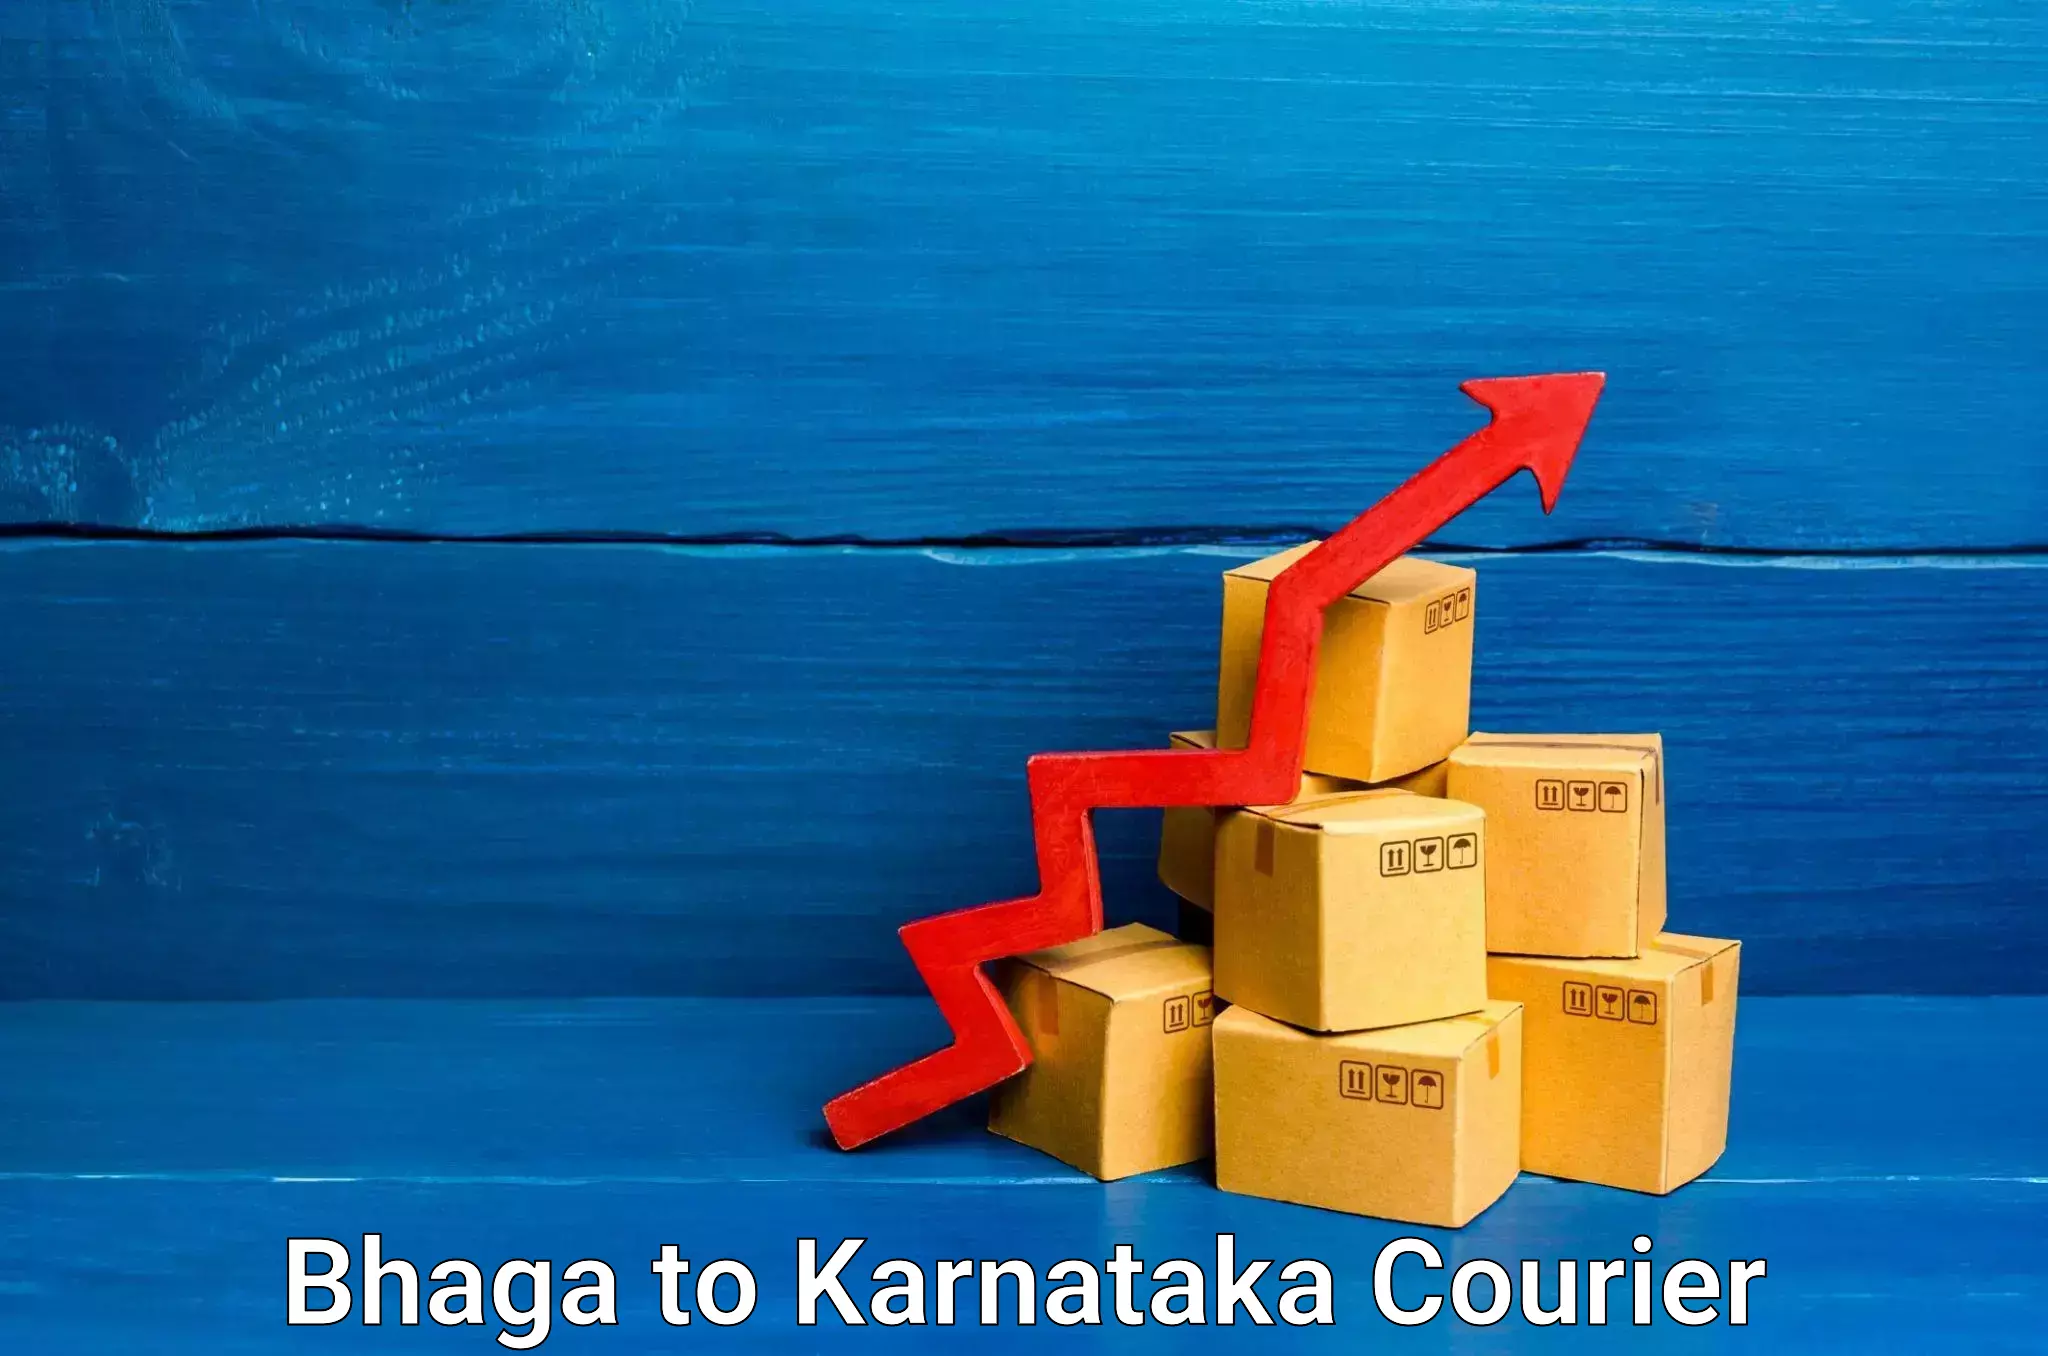 State-of-the-art courier technology Bhaga to Bangalore